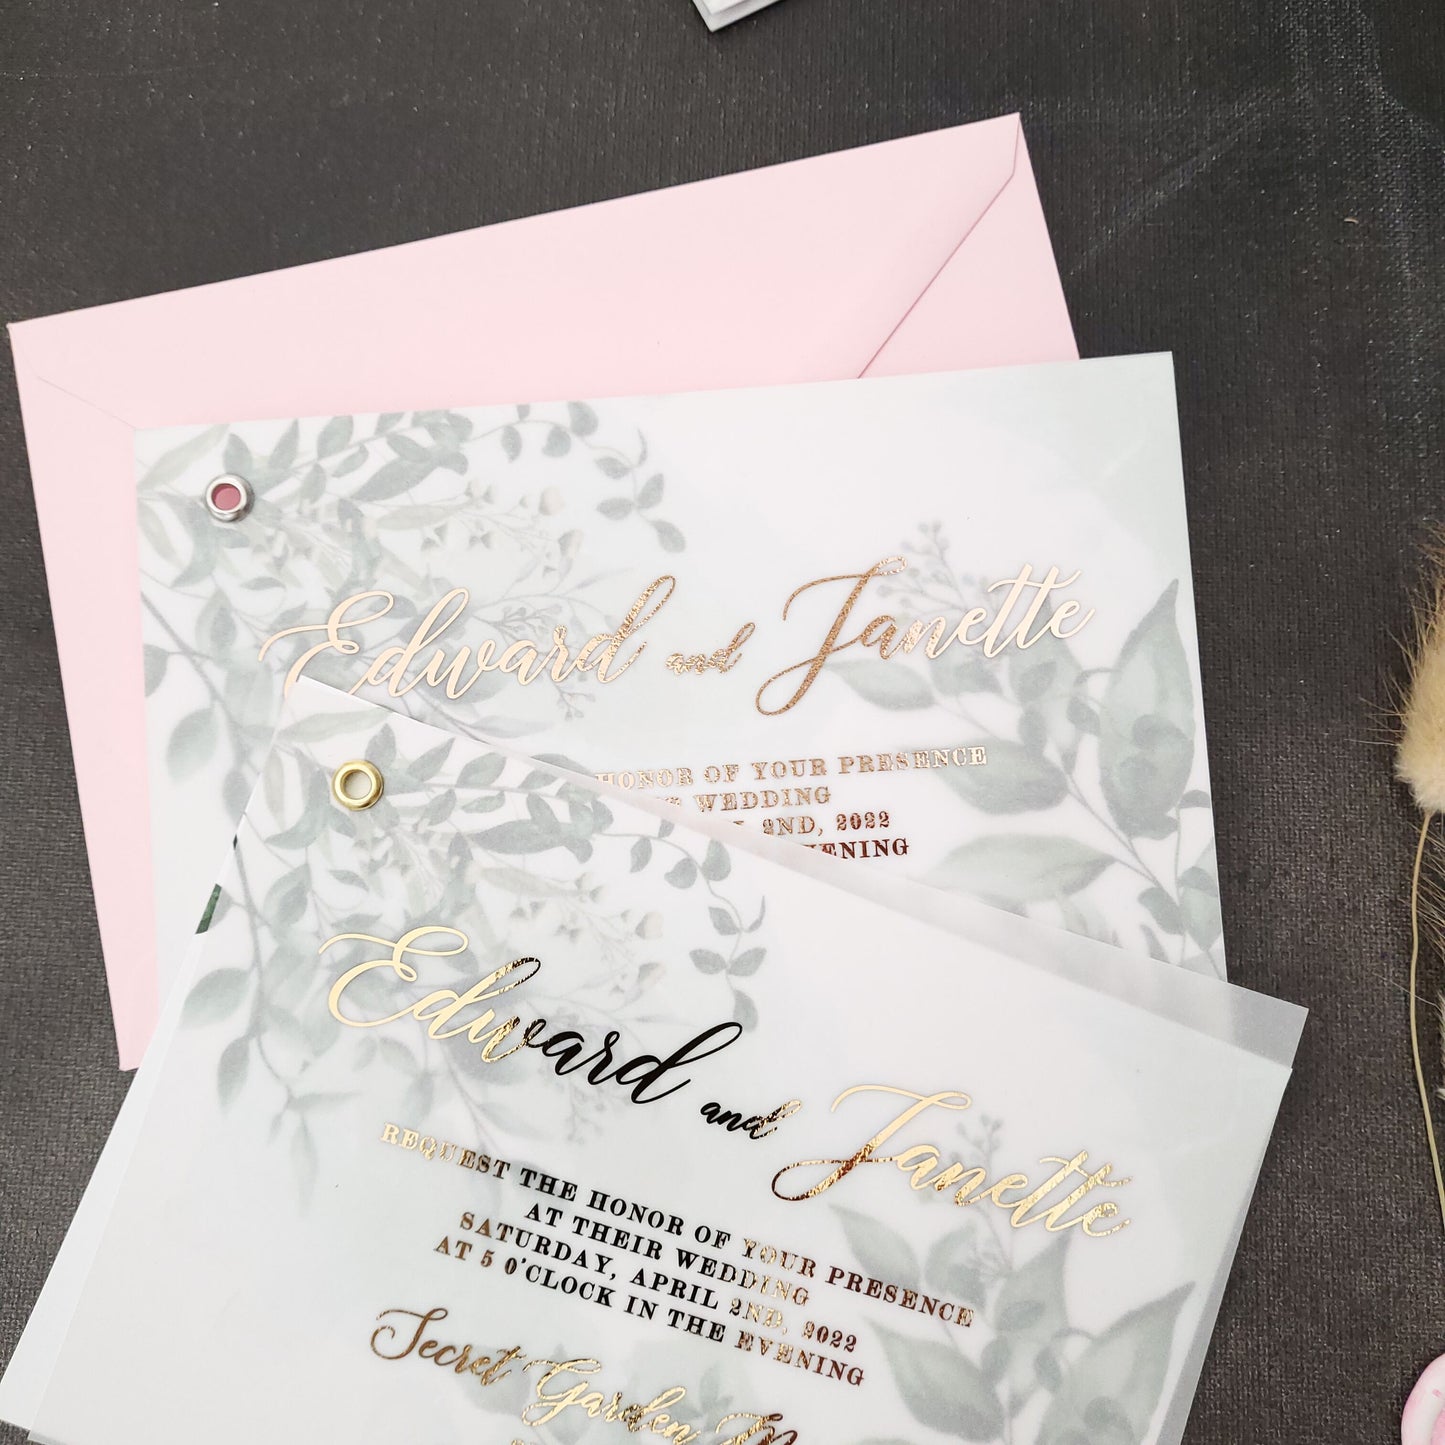 Vellum Wedding Invitation with Gold Foil Print - Elegant and Luxurious Design with Greenery Accents